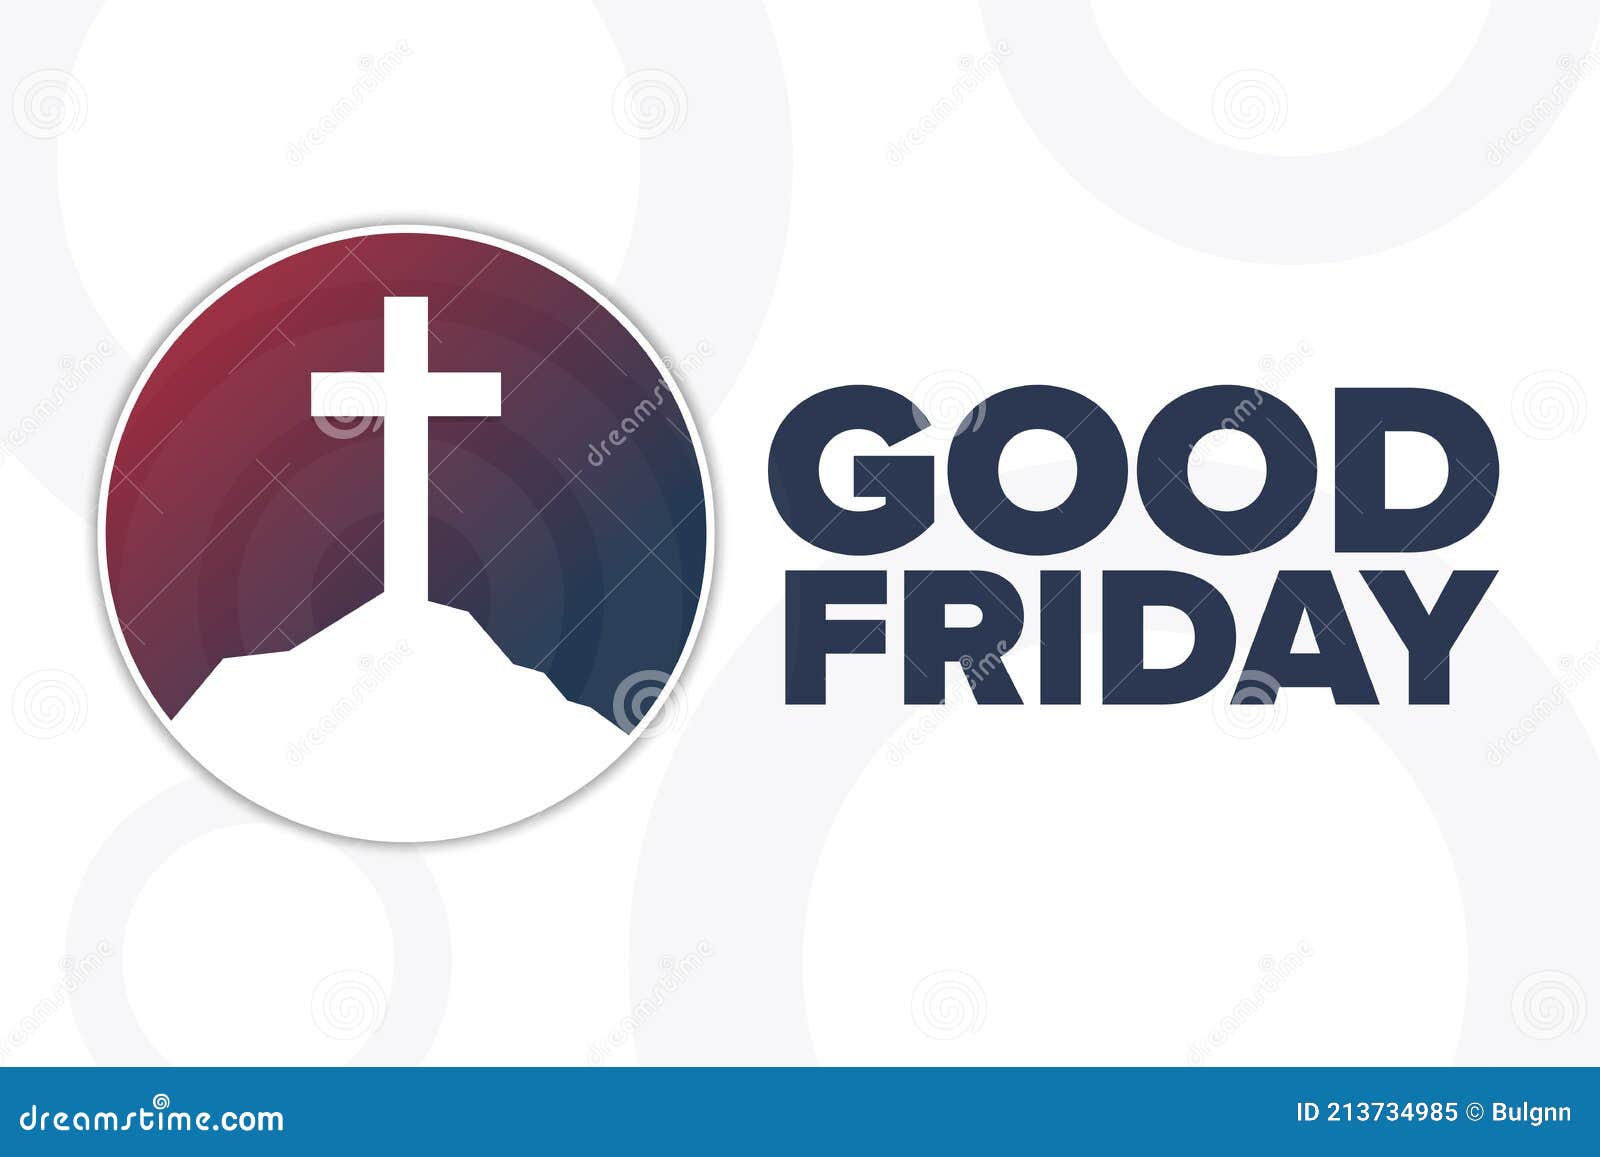 Good Friday. Holiday Concept. Template for Background, Banner, Card, Poster  with Text Inscription Stock Vector - Illustration of christ, easter:  213734985